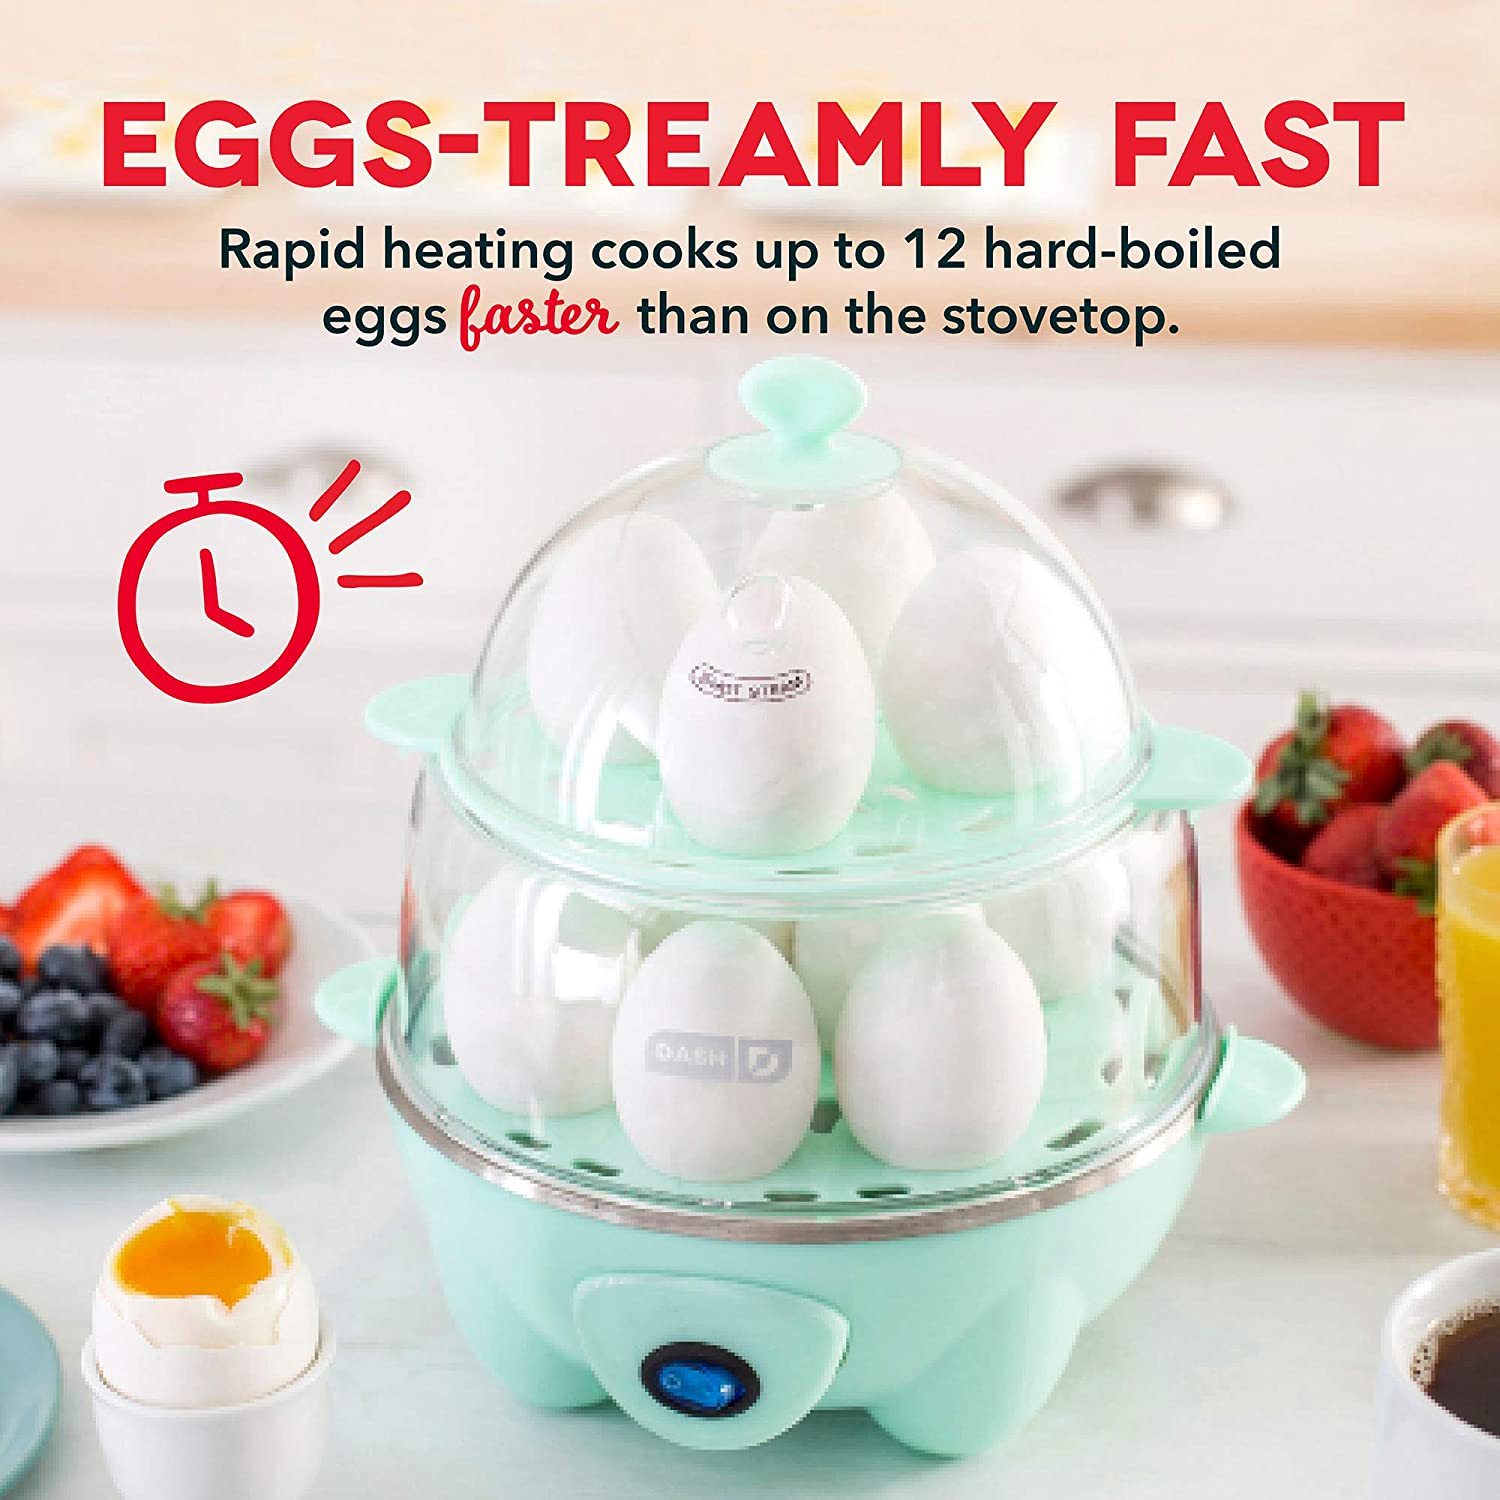 dash-deluxe-rapid-egg-cooker-electric-12-capacity-for-hard-boiled-poached-scrambled-omelets-steamed-vegetables-seafood-dumplings-more-with-auto-shut-off-feature-aqua-2021-2-24